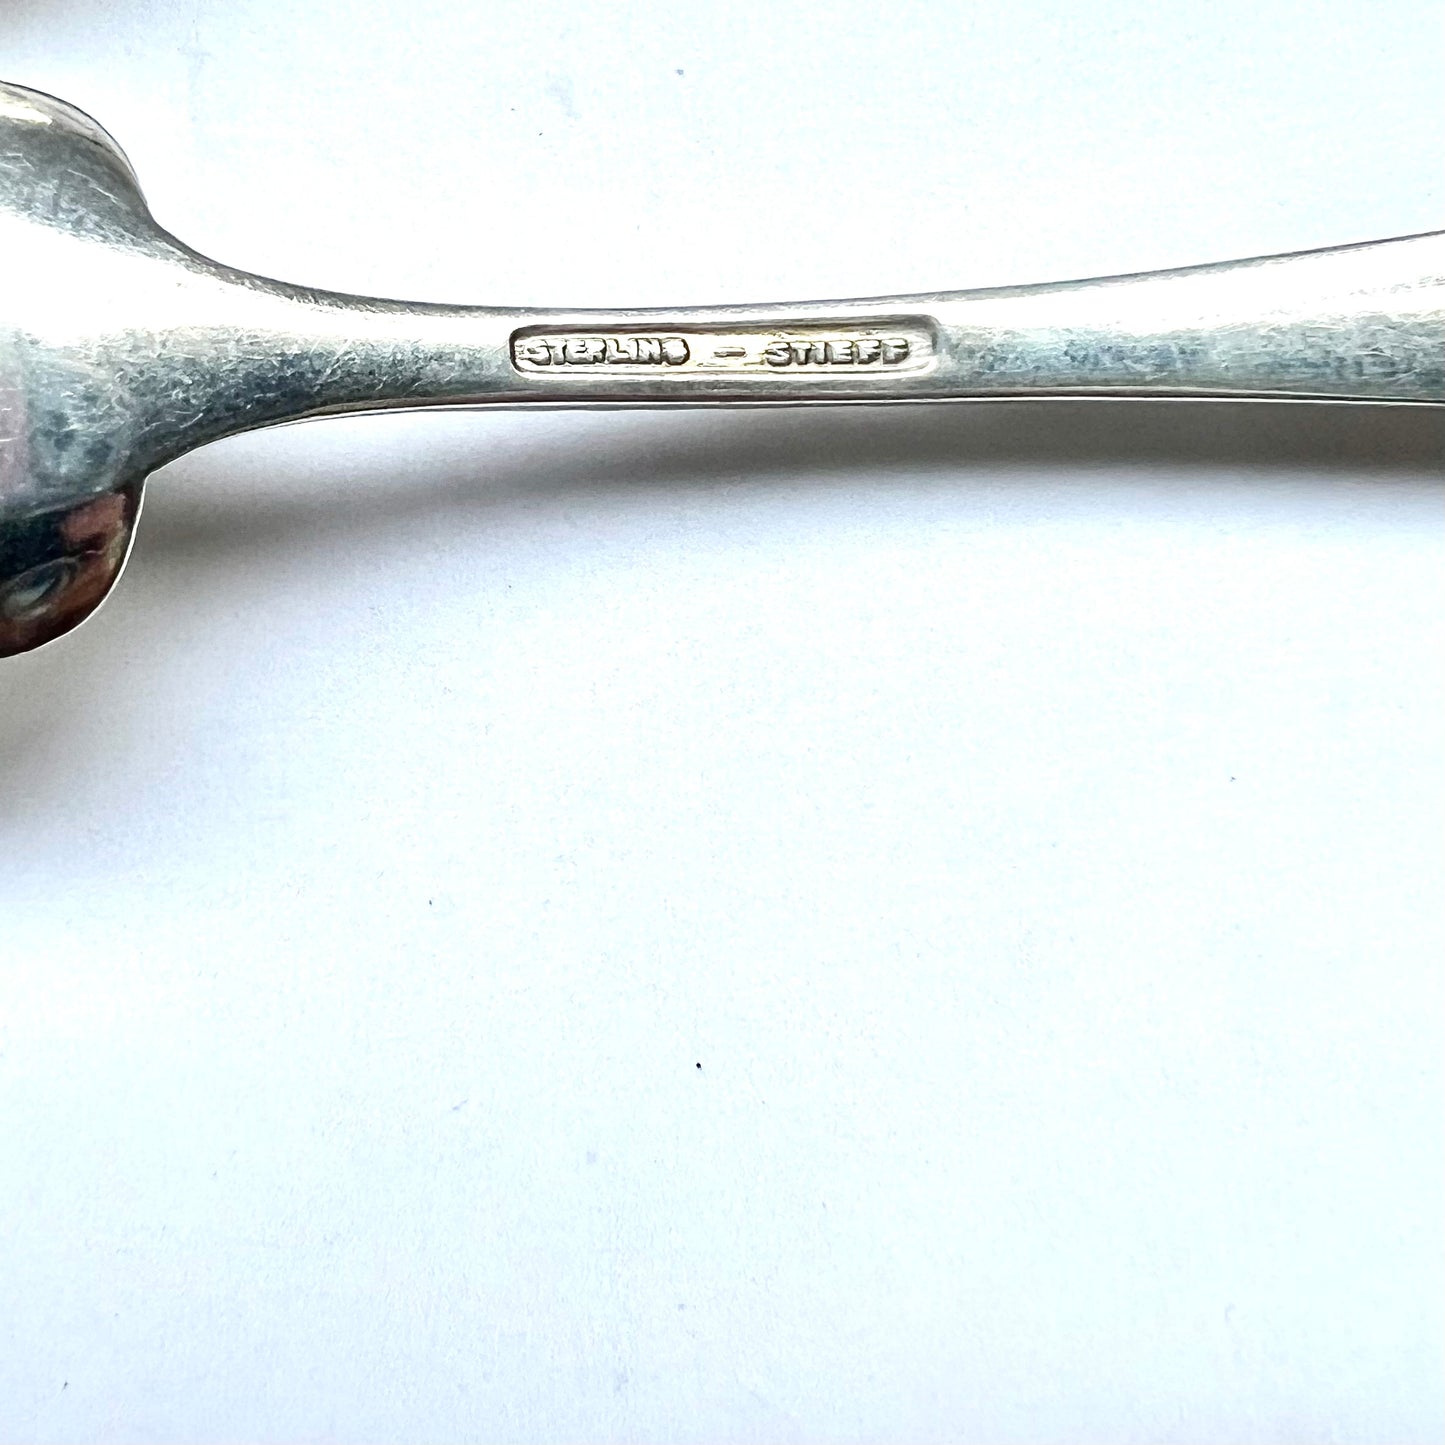 Vintage 1930s American sterling silver Rose Pattern ice cream spoons by Stieff of Baltimore, Maryland.